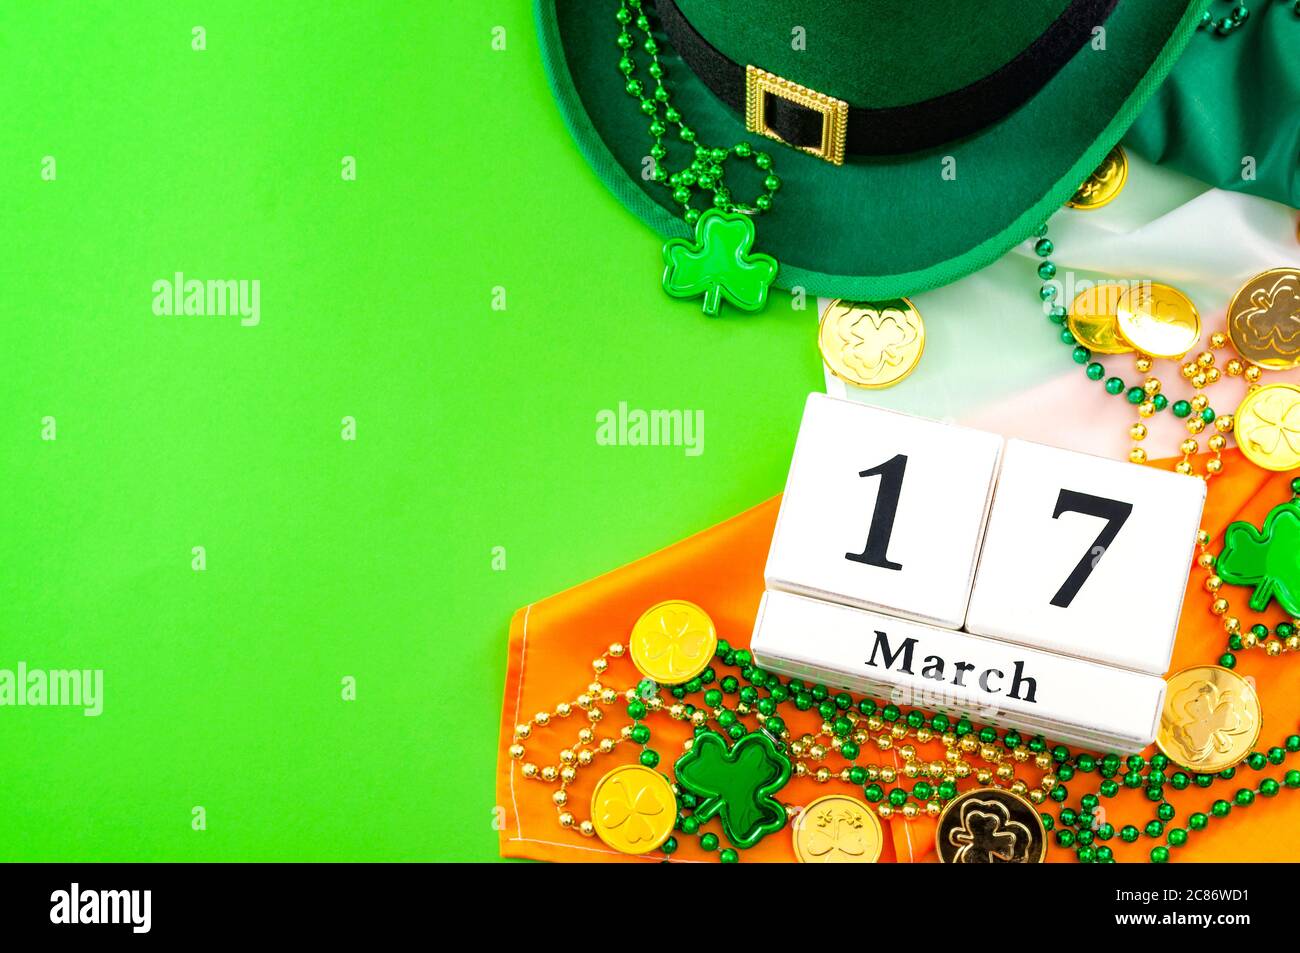 The luck of the Irish meme and Happy St Patricks day concept theme with a calendar, leprechaun hat, beads necklace and gold coins on the Ireland flag Stock Photo